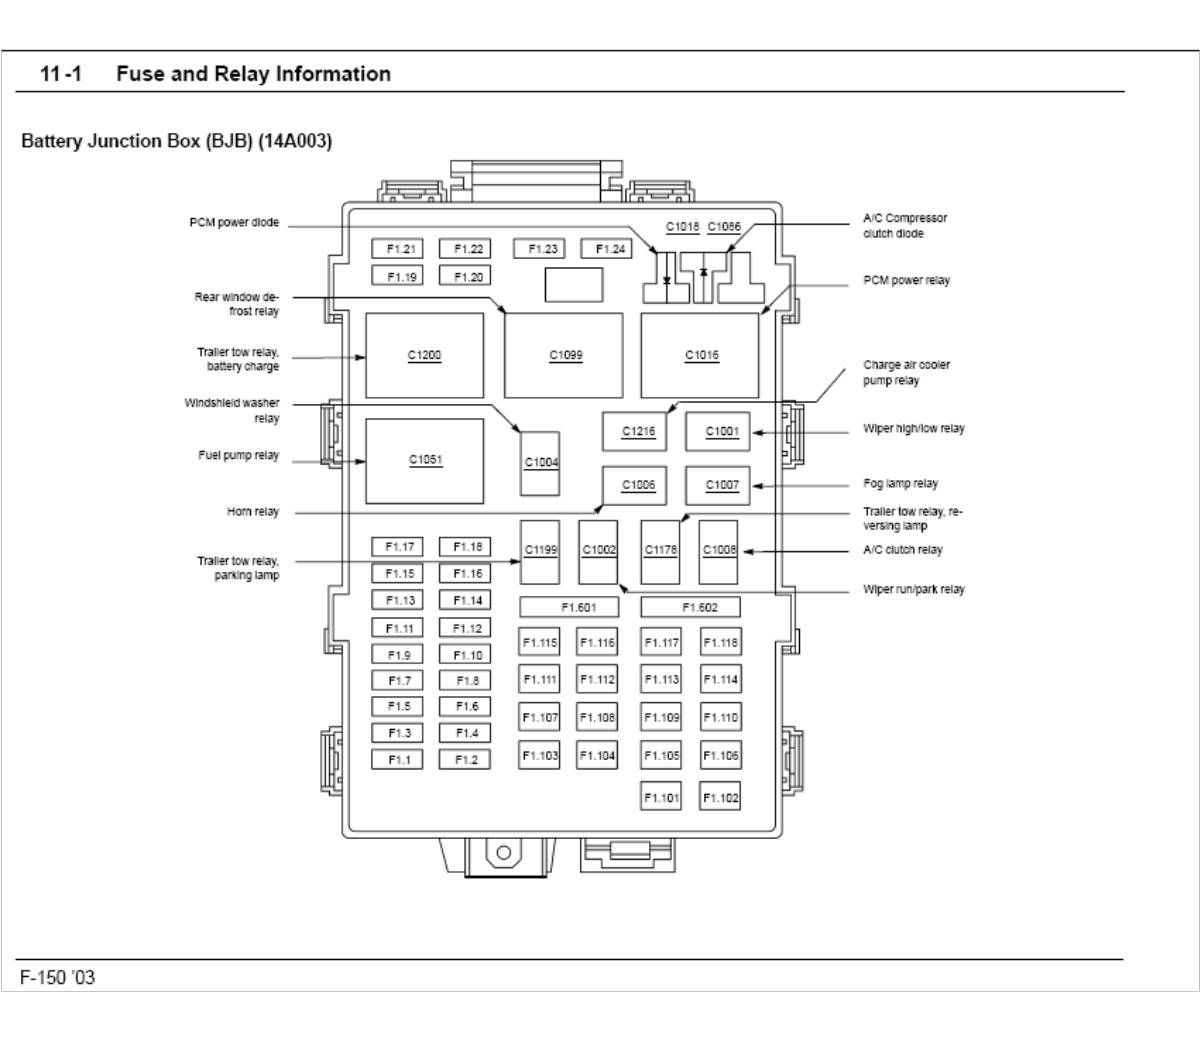 2000 Ford F150 Wiring Diagram from www.f150online.com